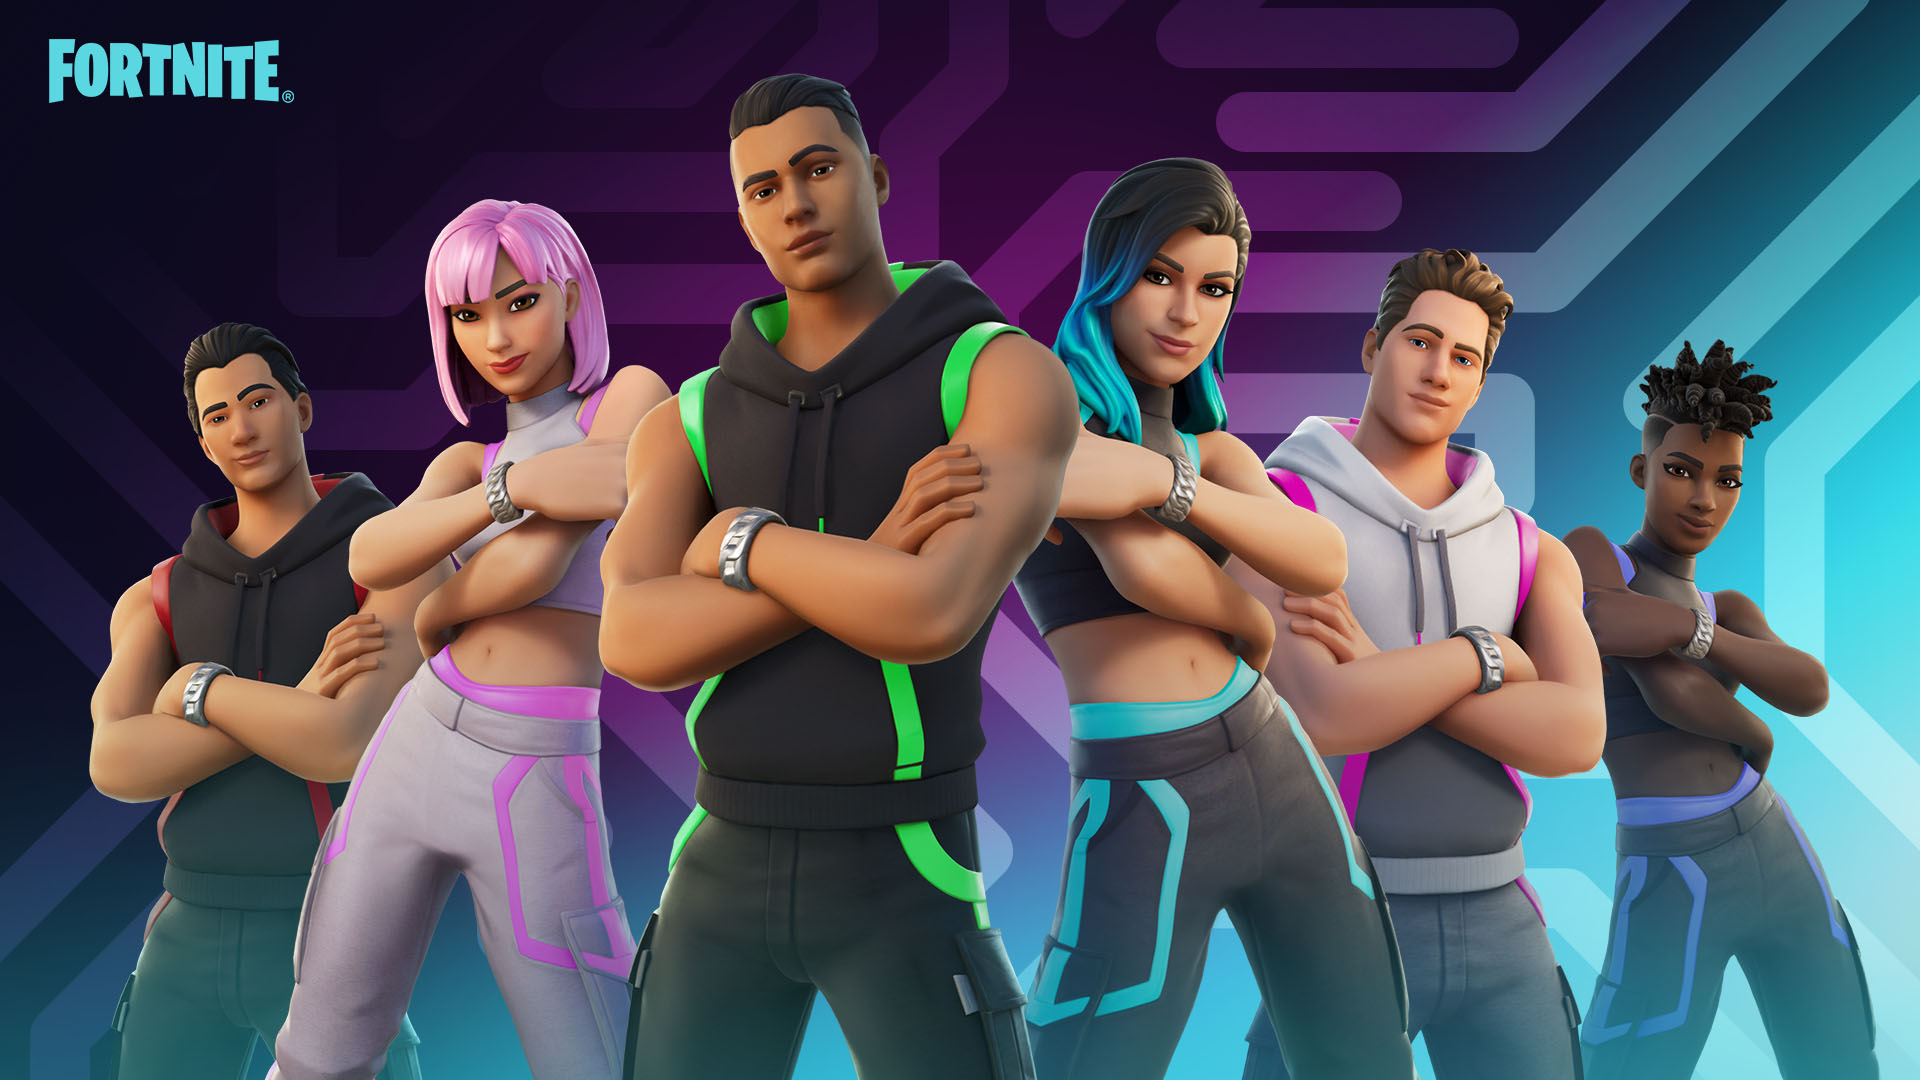 Fortnite Rift Tour featuring Ariana Grande: What to expect?